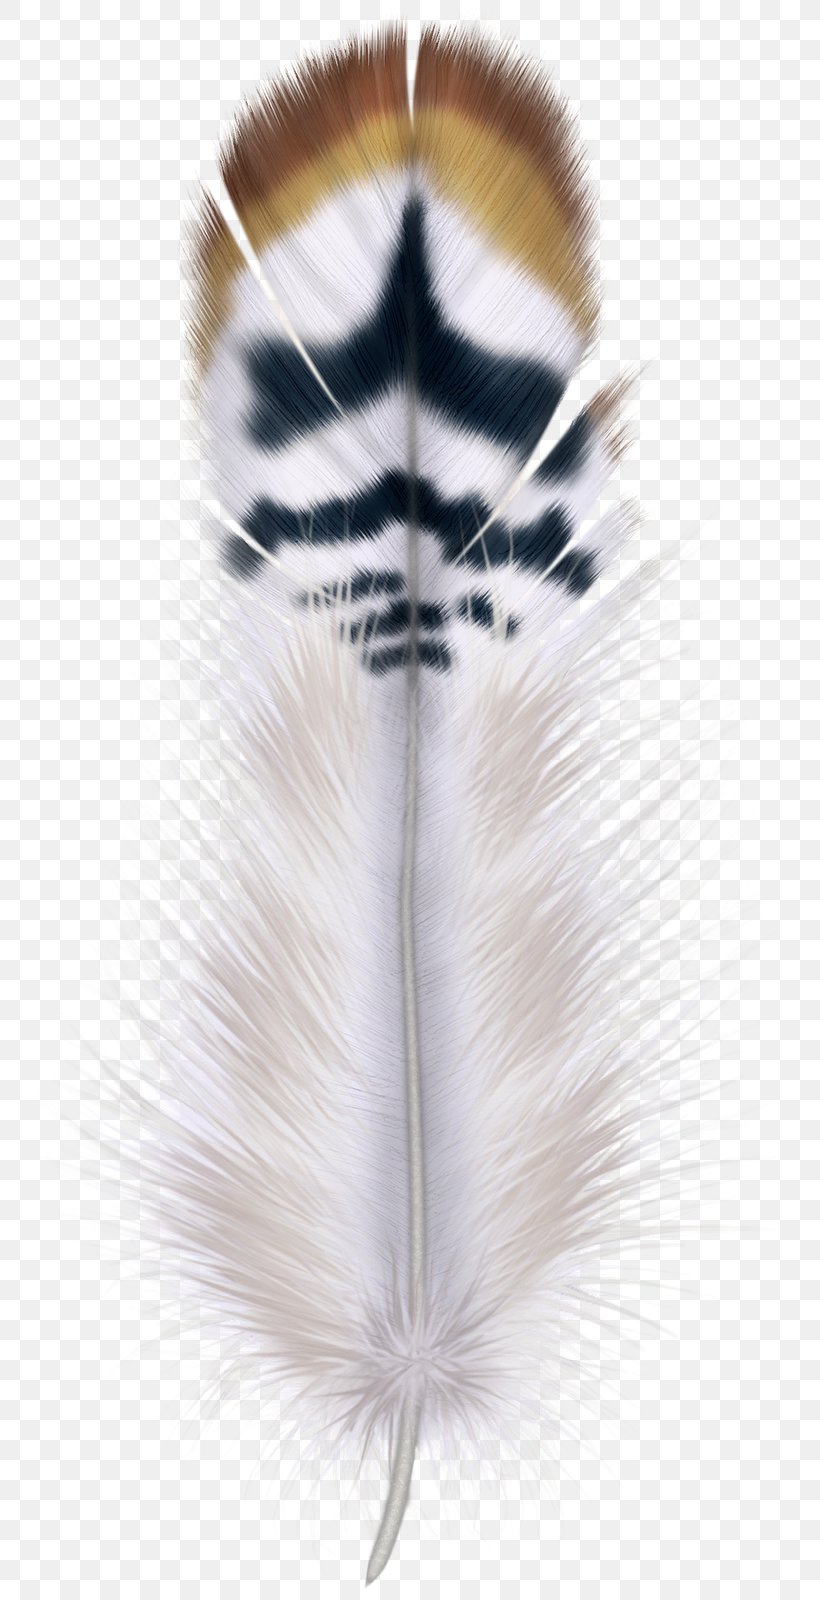 Feather Bird Hair, PNG, 786x1600px, Feather, Bird, Fur, Hair, Head Download Free